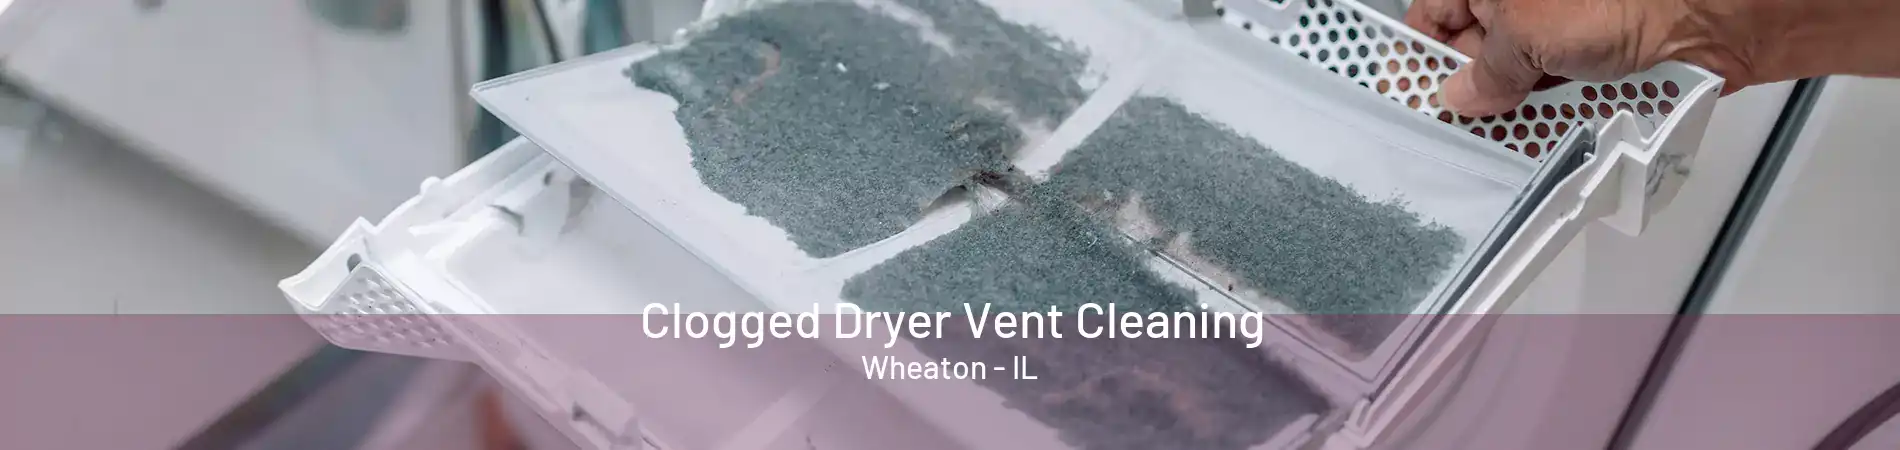 Clogged Dryer Vent Cleaning Wheaton - IL